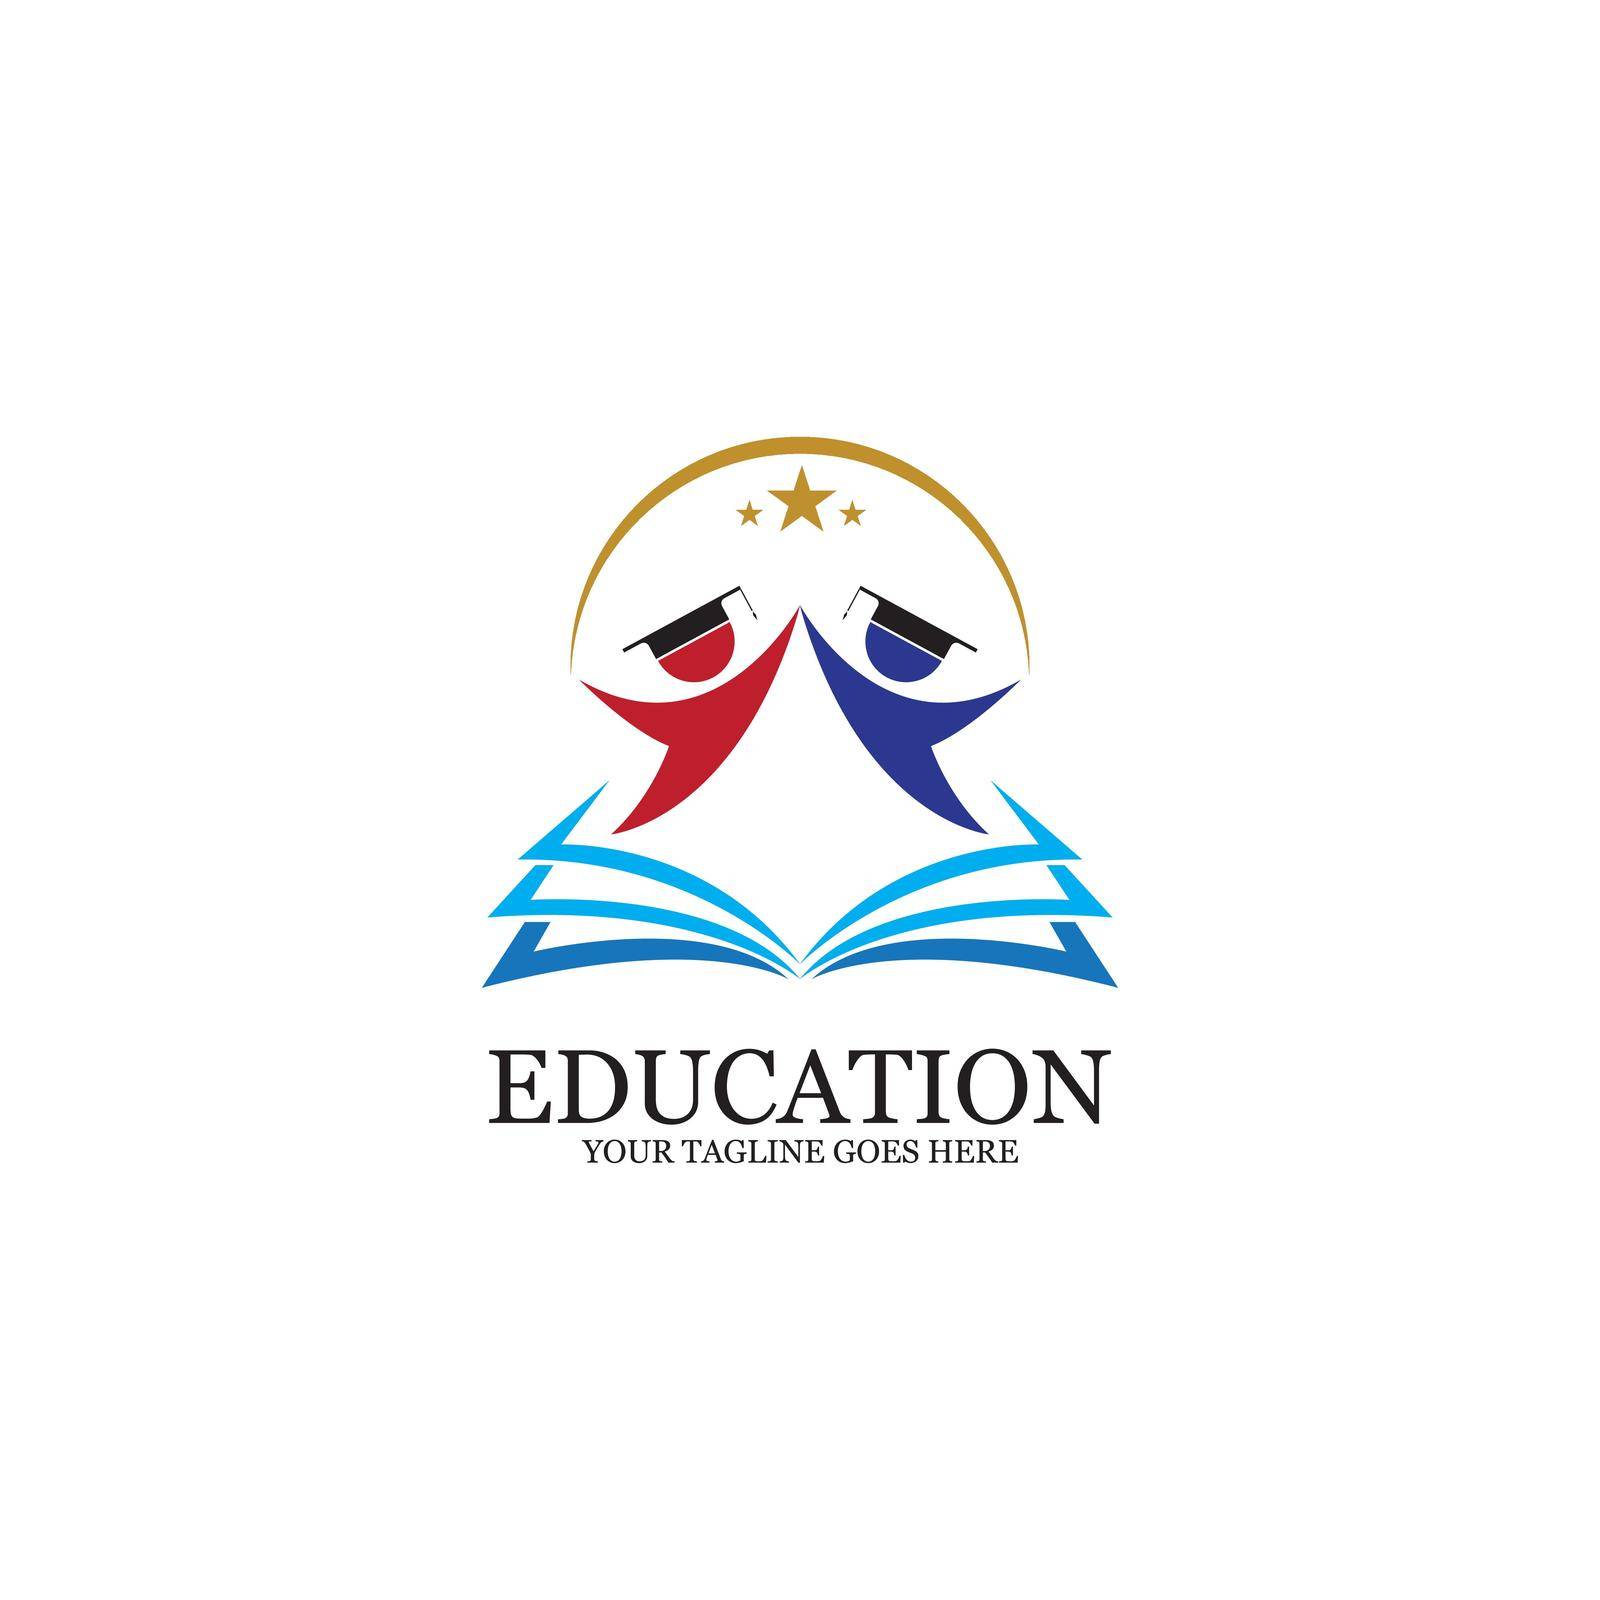 Education Logo Template vector by Graphicindo